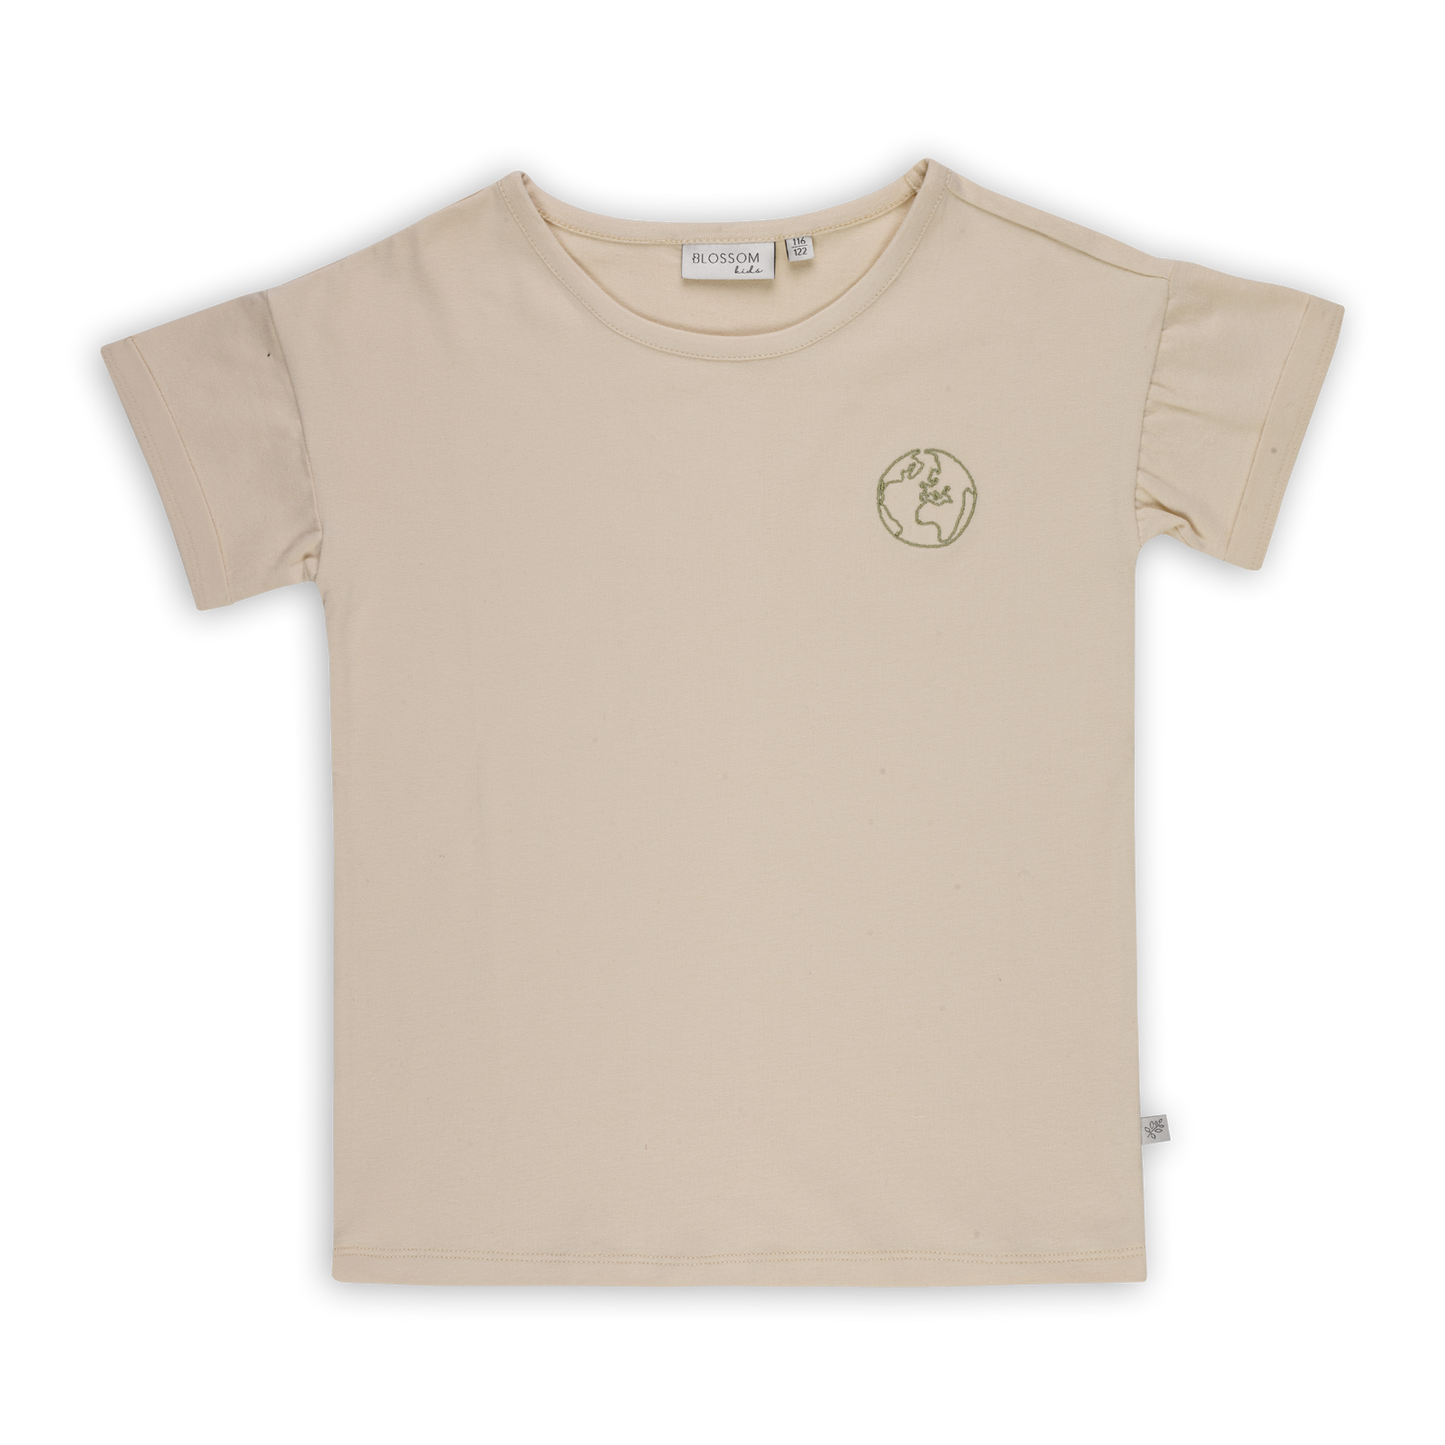 Blossom Kids - Shirt with embroidery - Planet